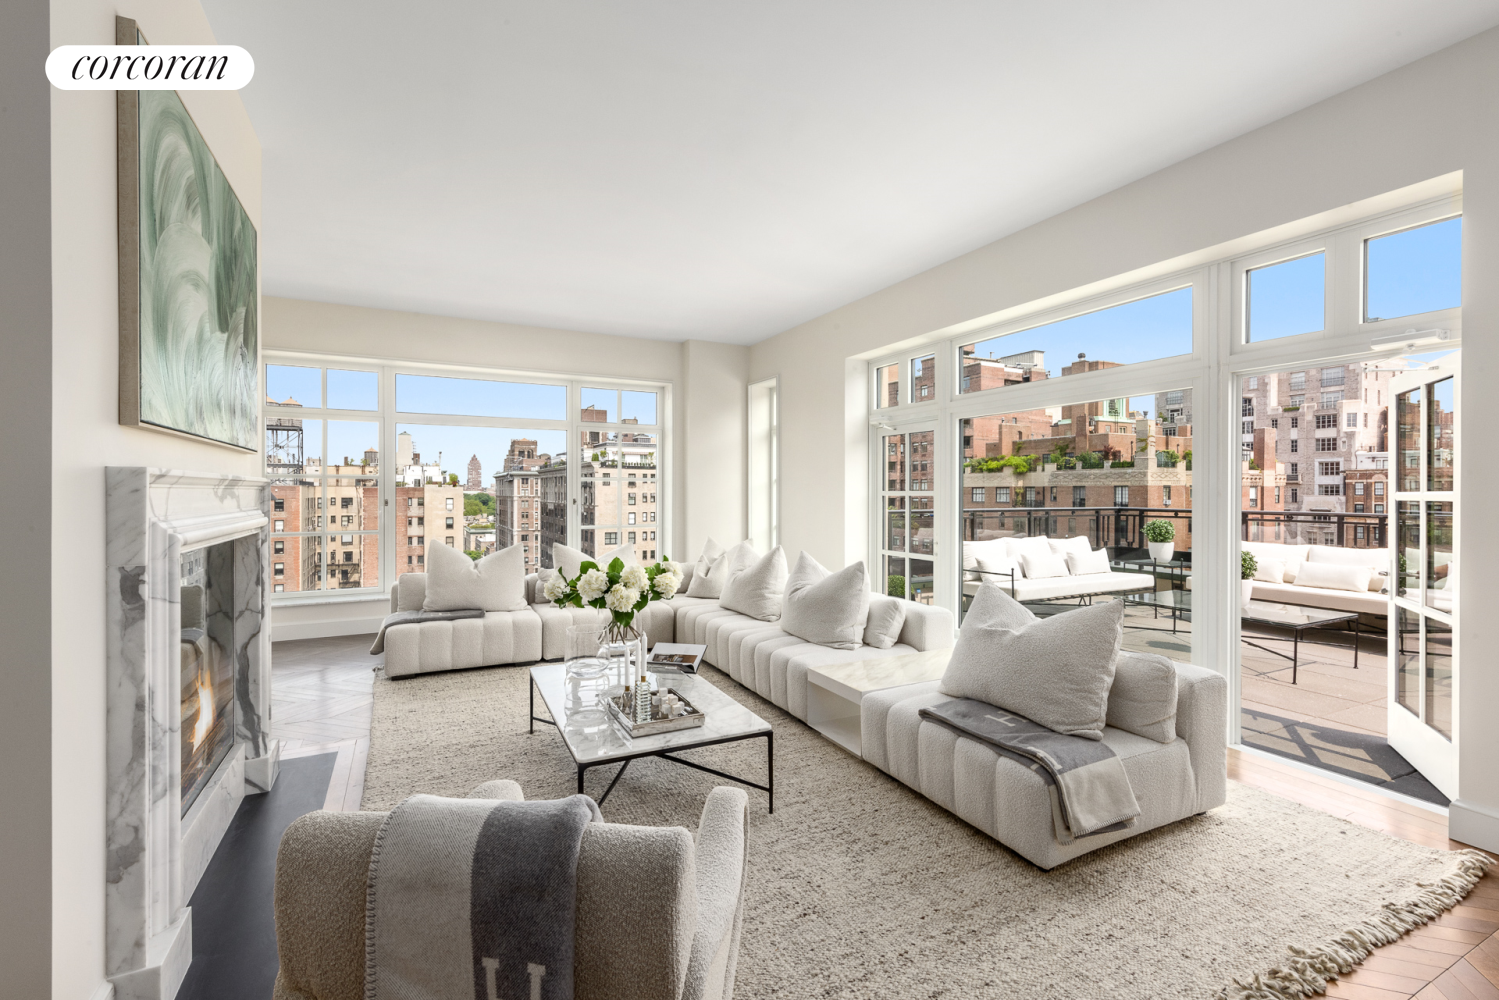 150 East 78th Street Ph, Lenox Hill, Upper East Side, NYC - 6 Bedrooms  7.5 Bathrooms  14 Rooms - 